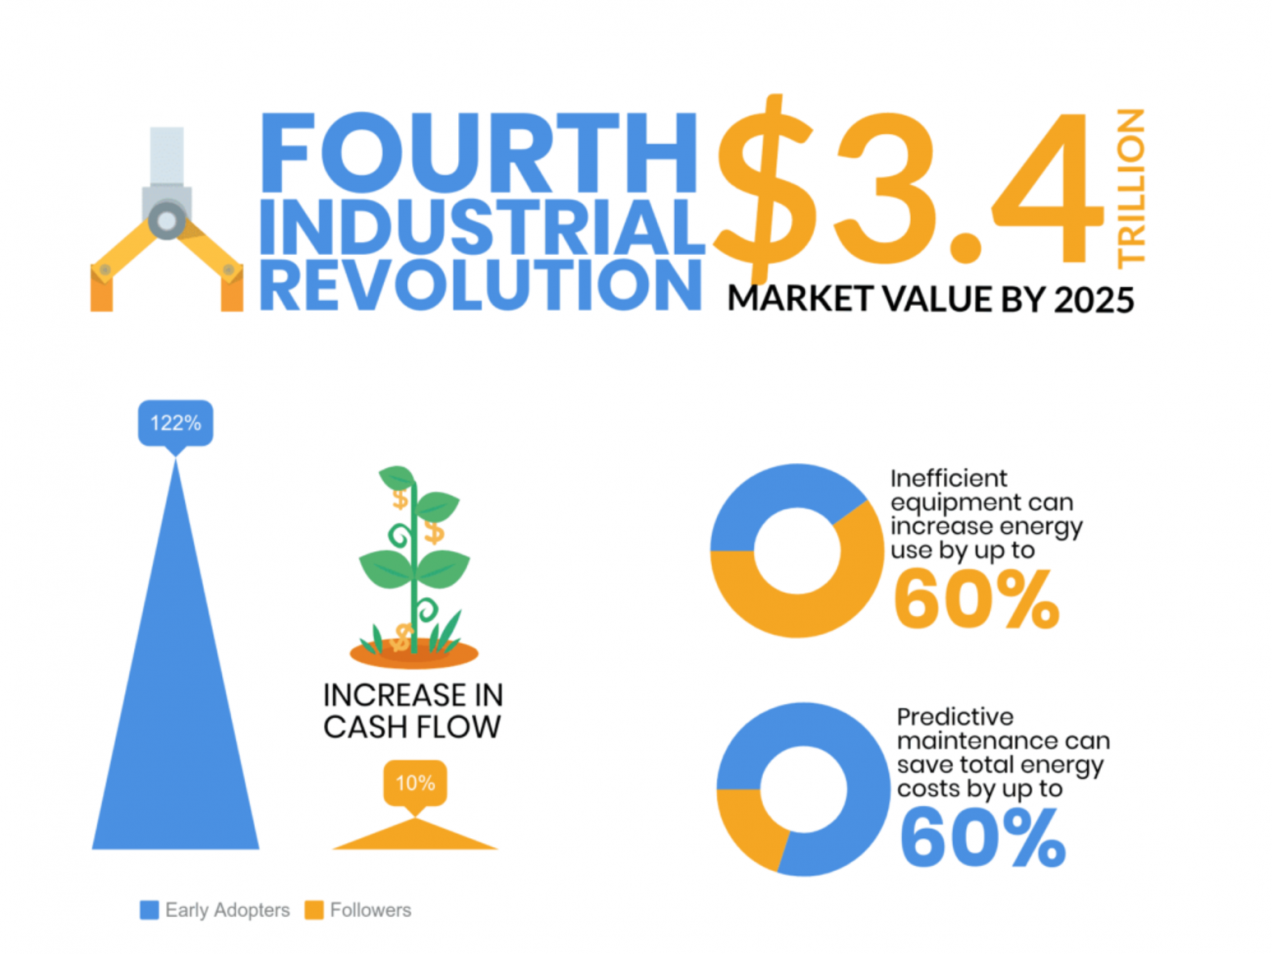 Infographic of the fourth industrial revolution. Inneficient equipment can increase costs up to 60%. Predictive maintenance can save up to 60% costs.